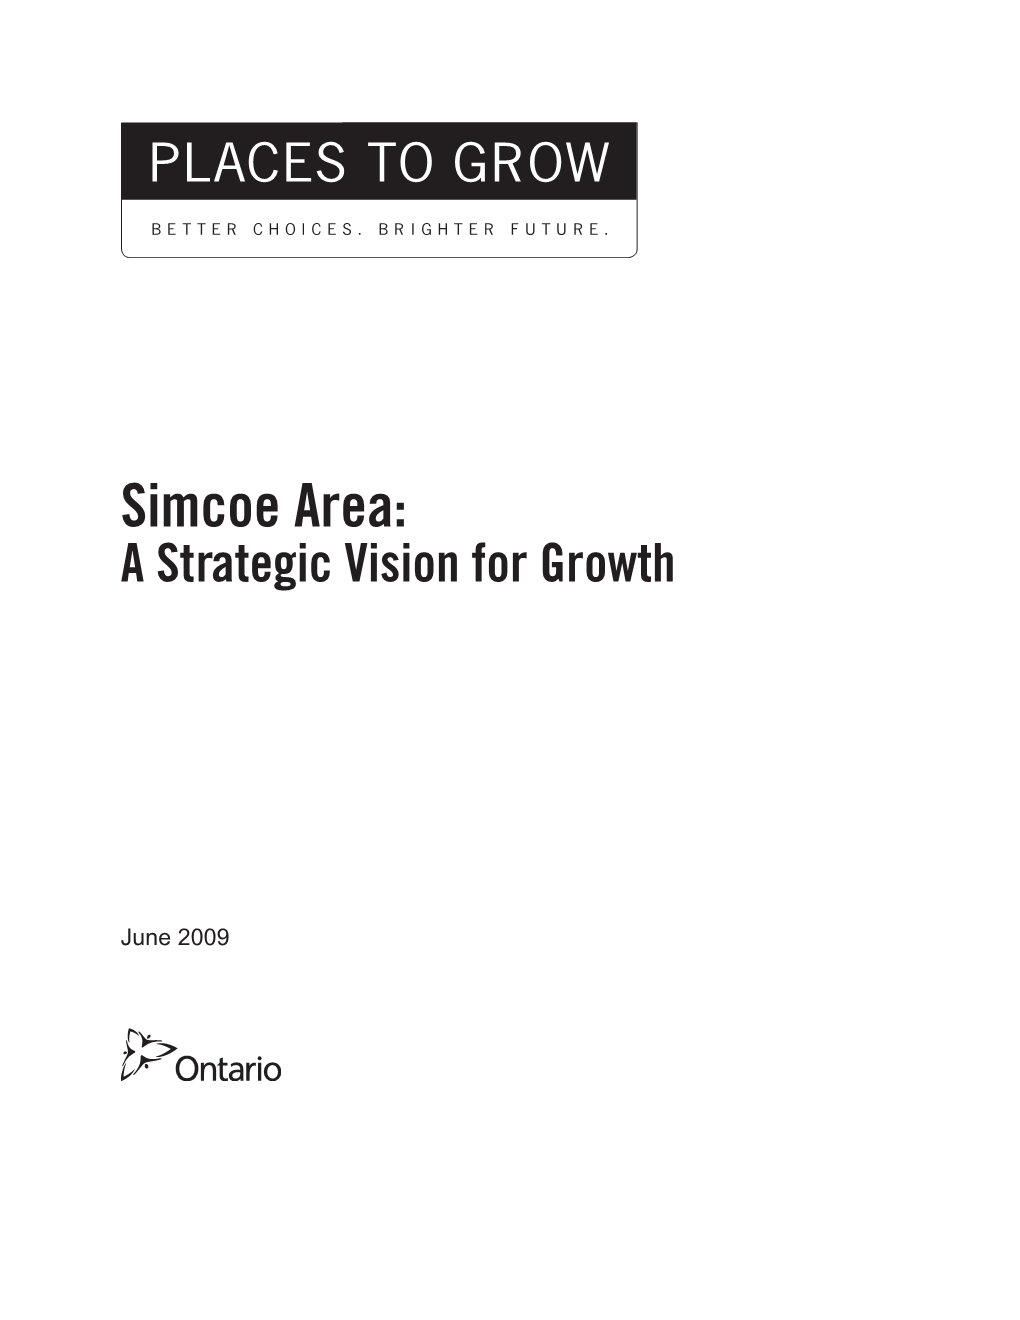 Simcoe Area: a S Trategic Vision for Growth